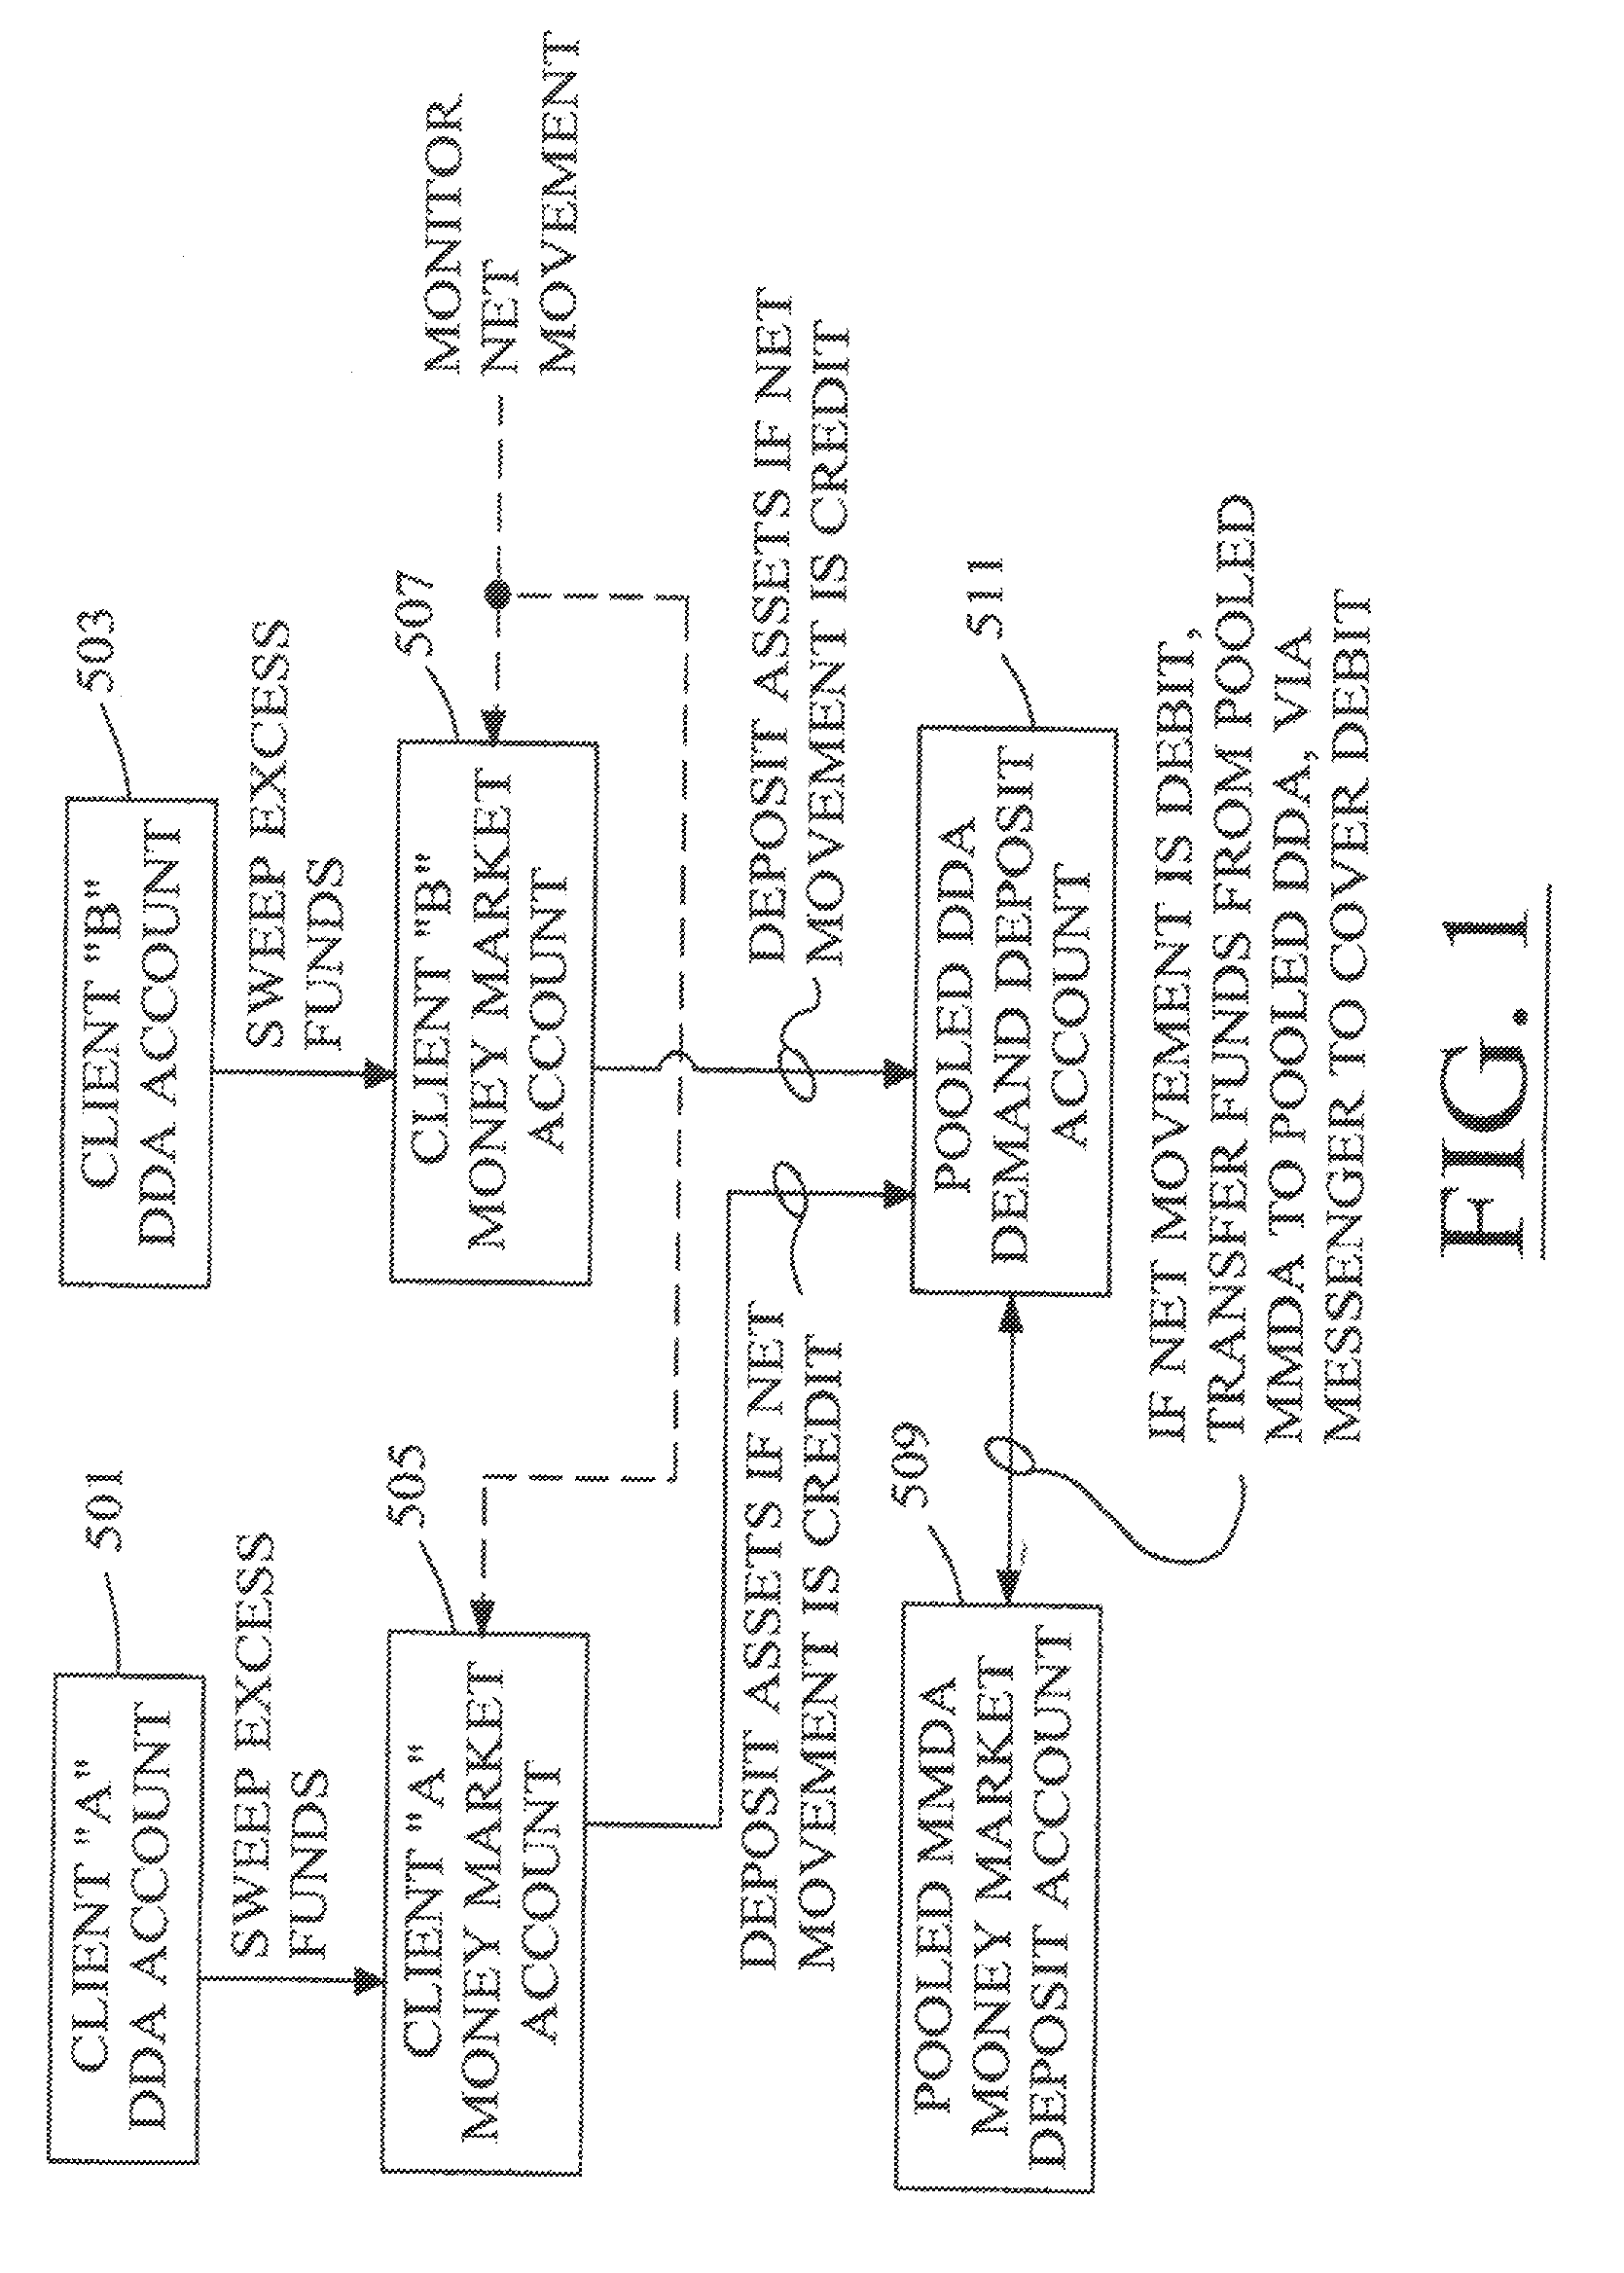 Systems and methods for adminstering return sweep accounts